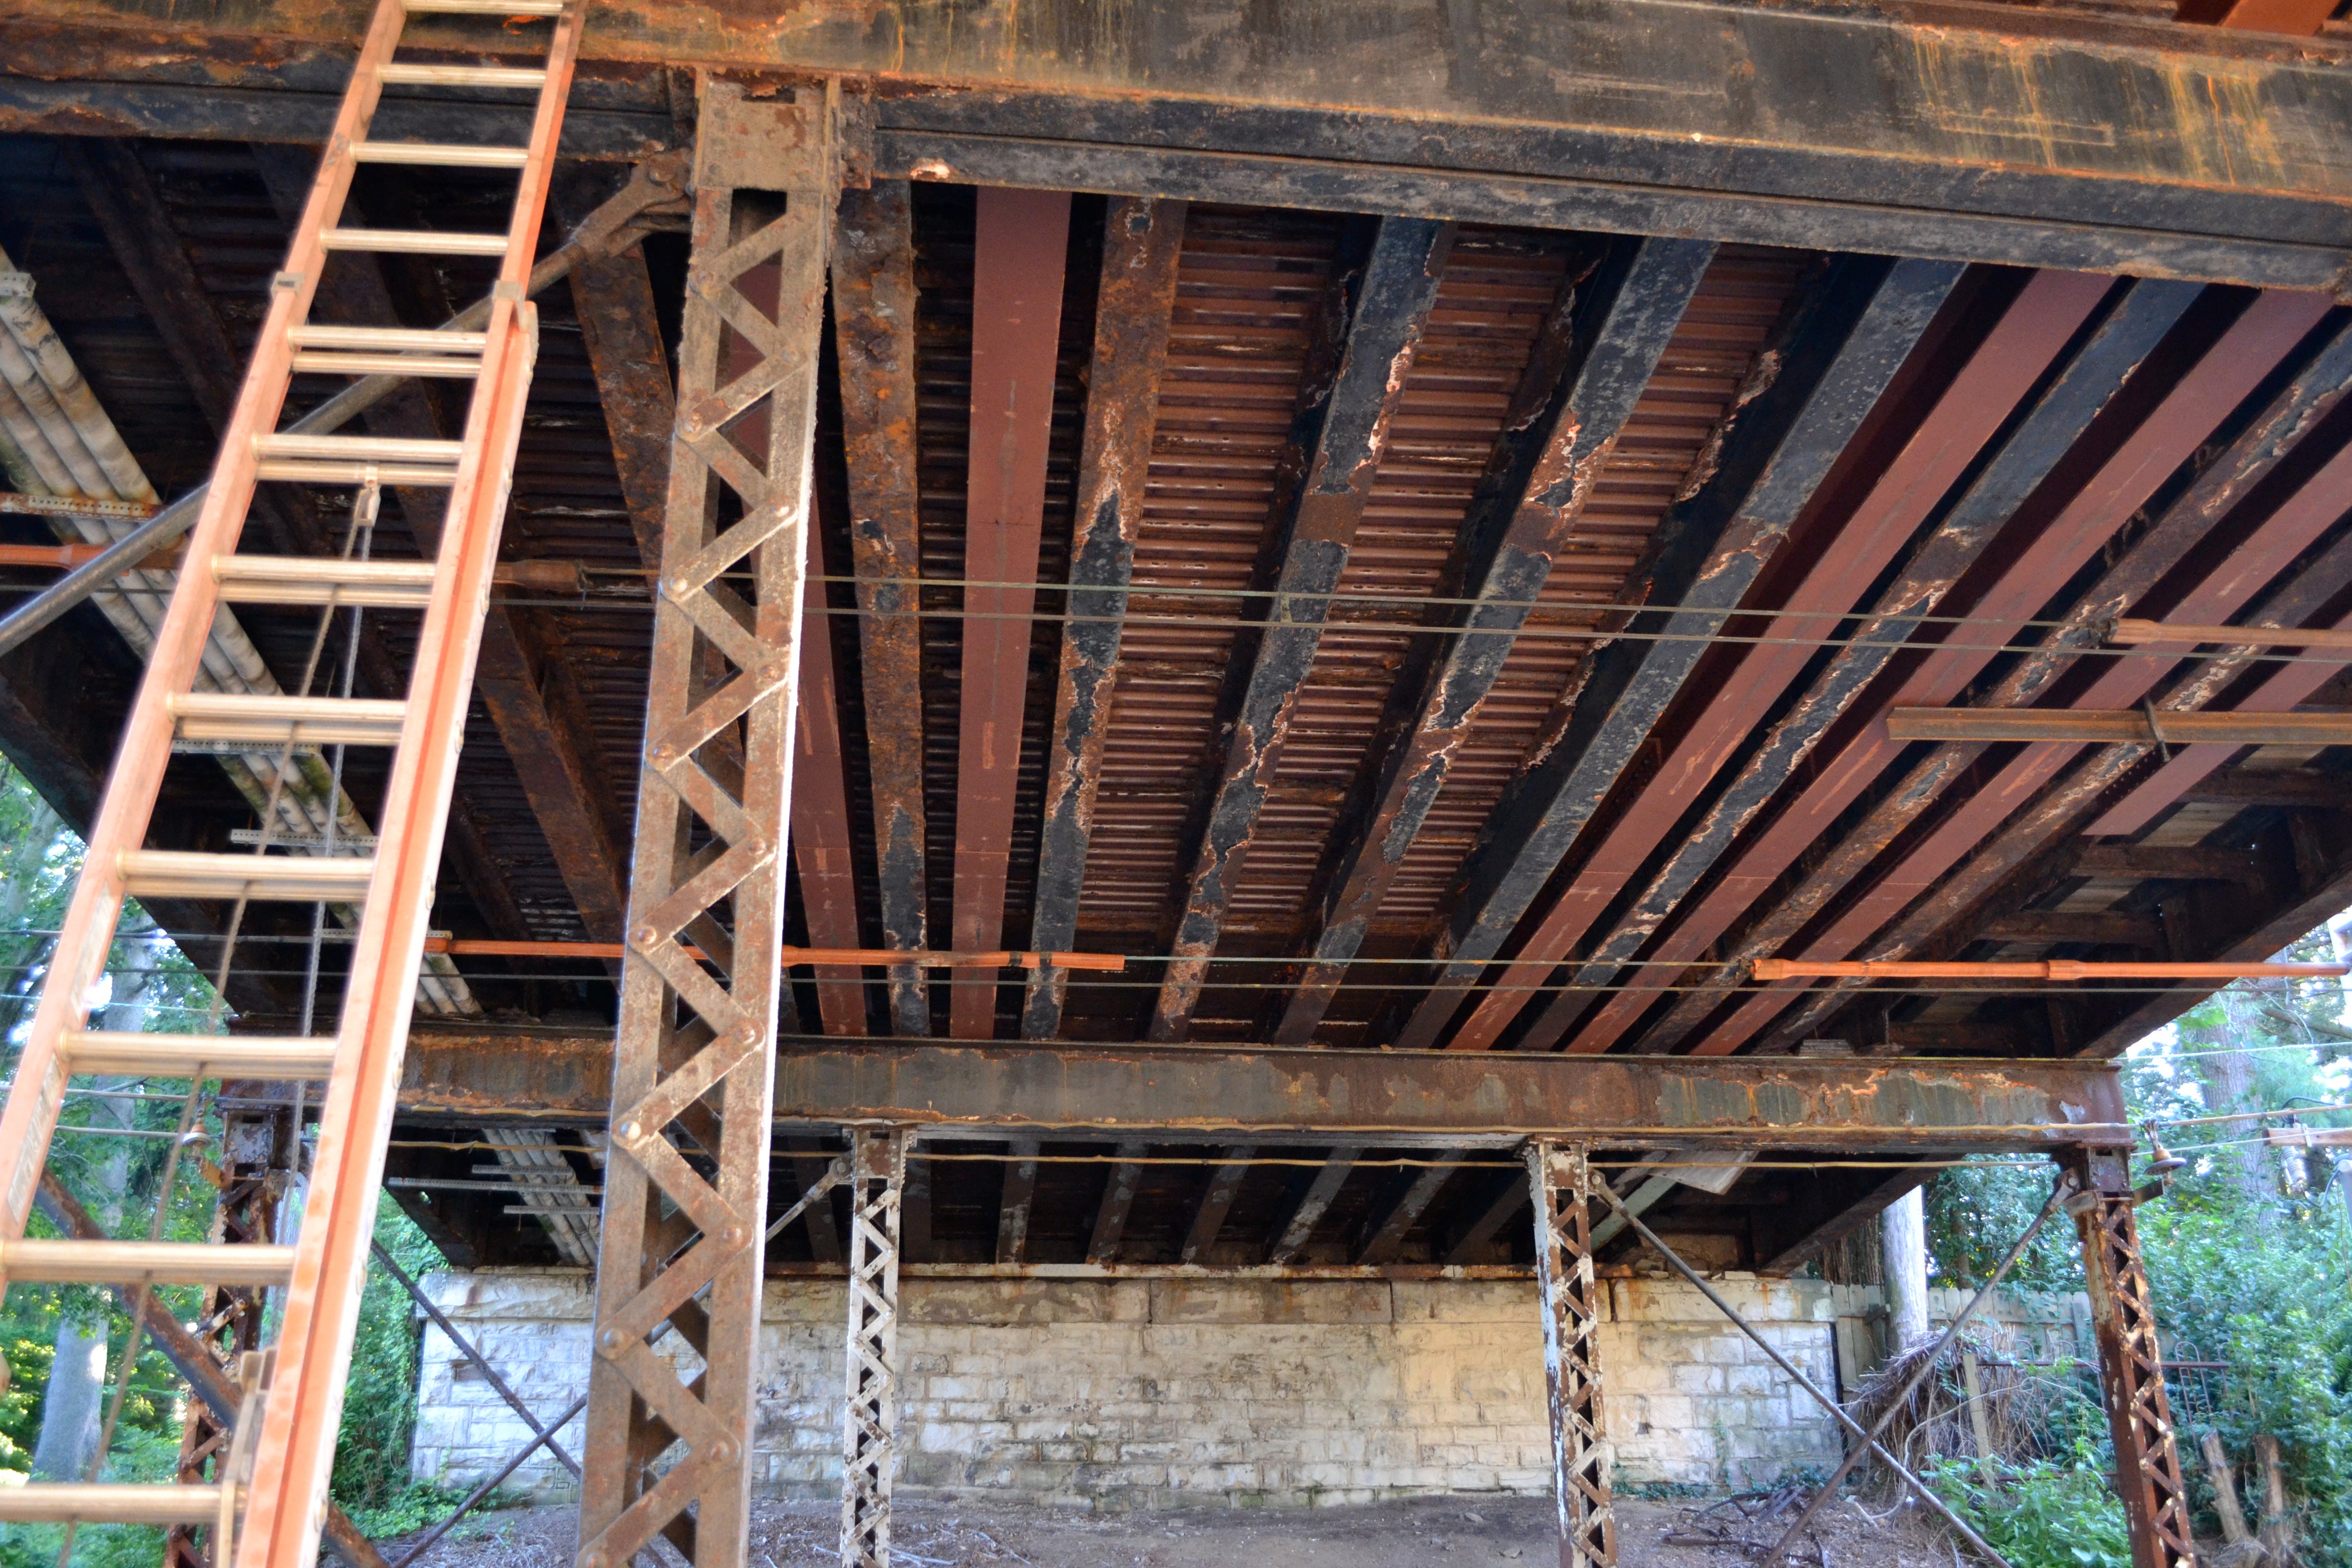 The new beams fit between and reinforce the old, corroded beams